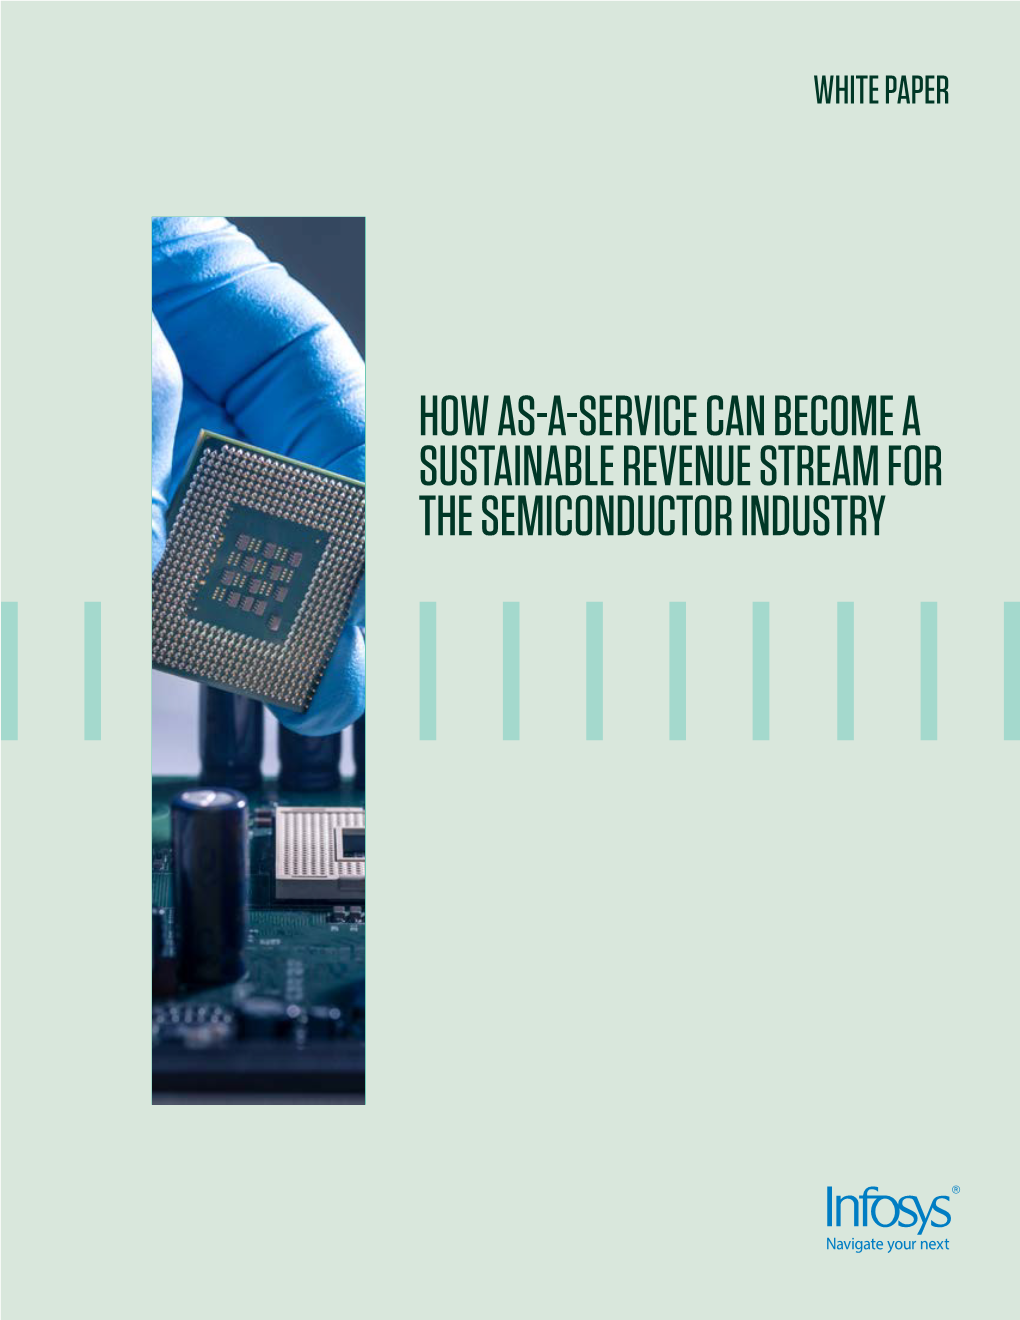 How As-A-Service Can Become a Sustainable Revenue Stream for The